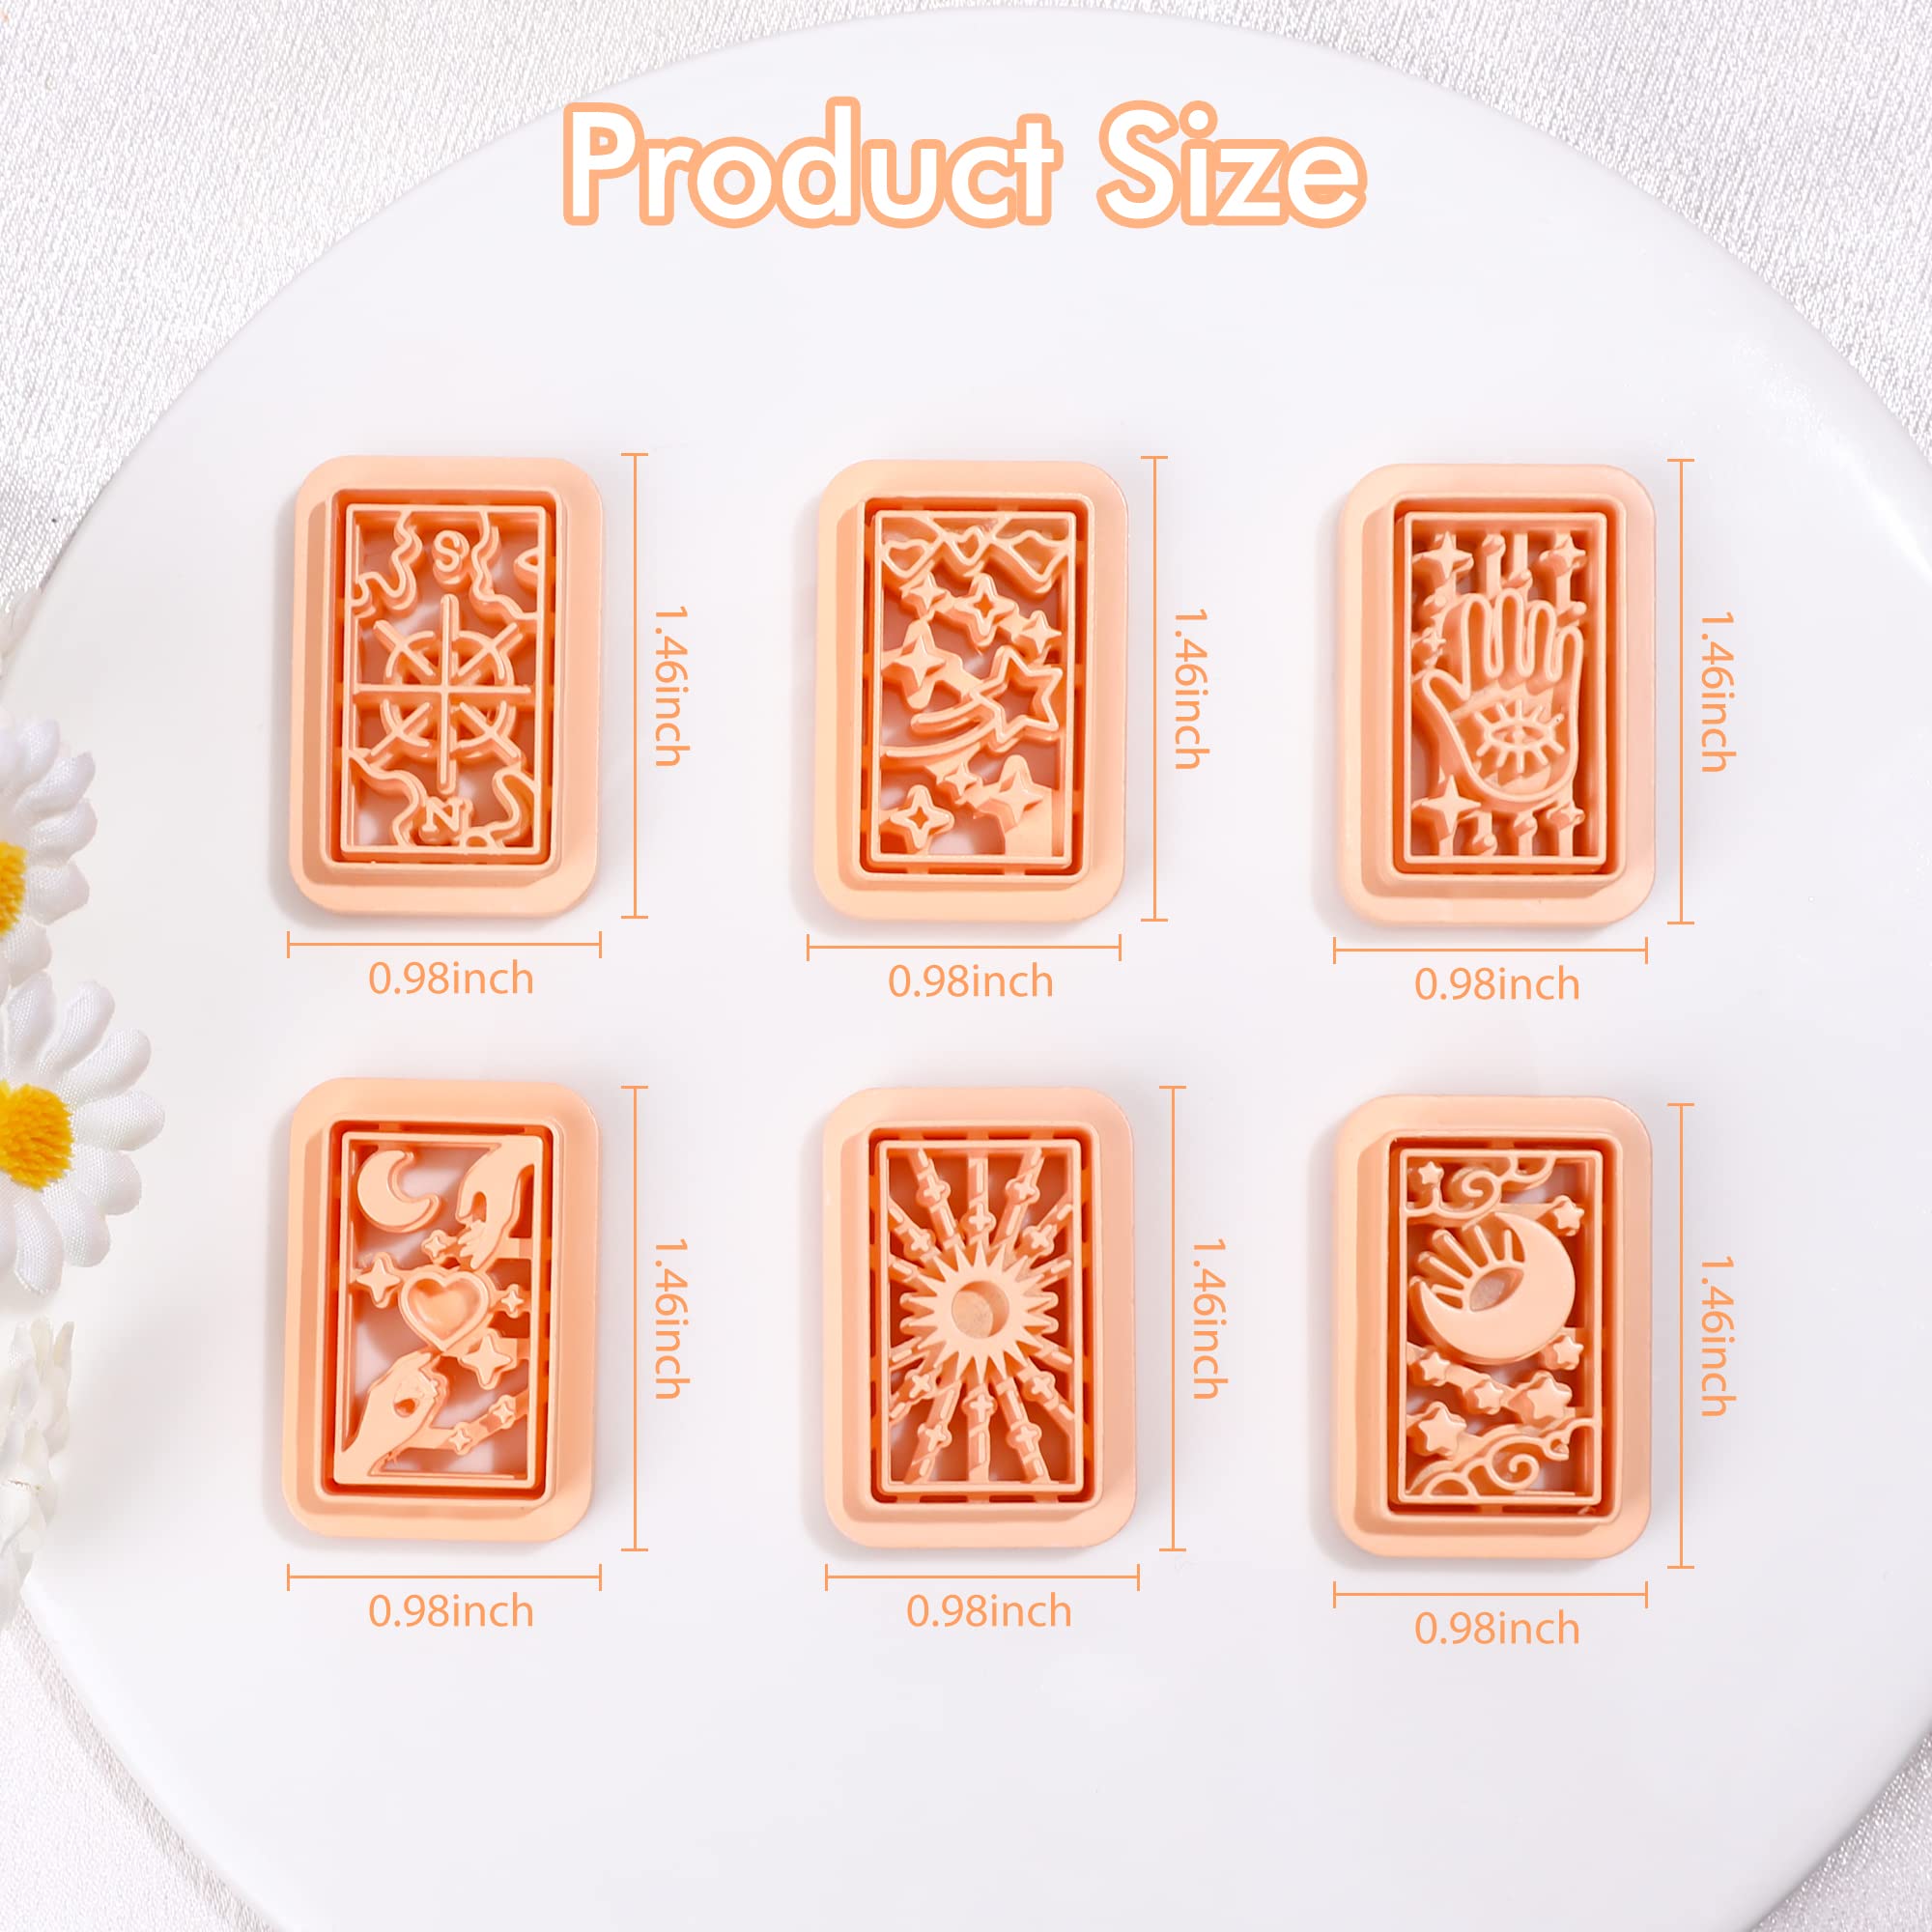 Puocaon Tarot Card Clay Cutters 6 Shapes